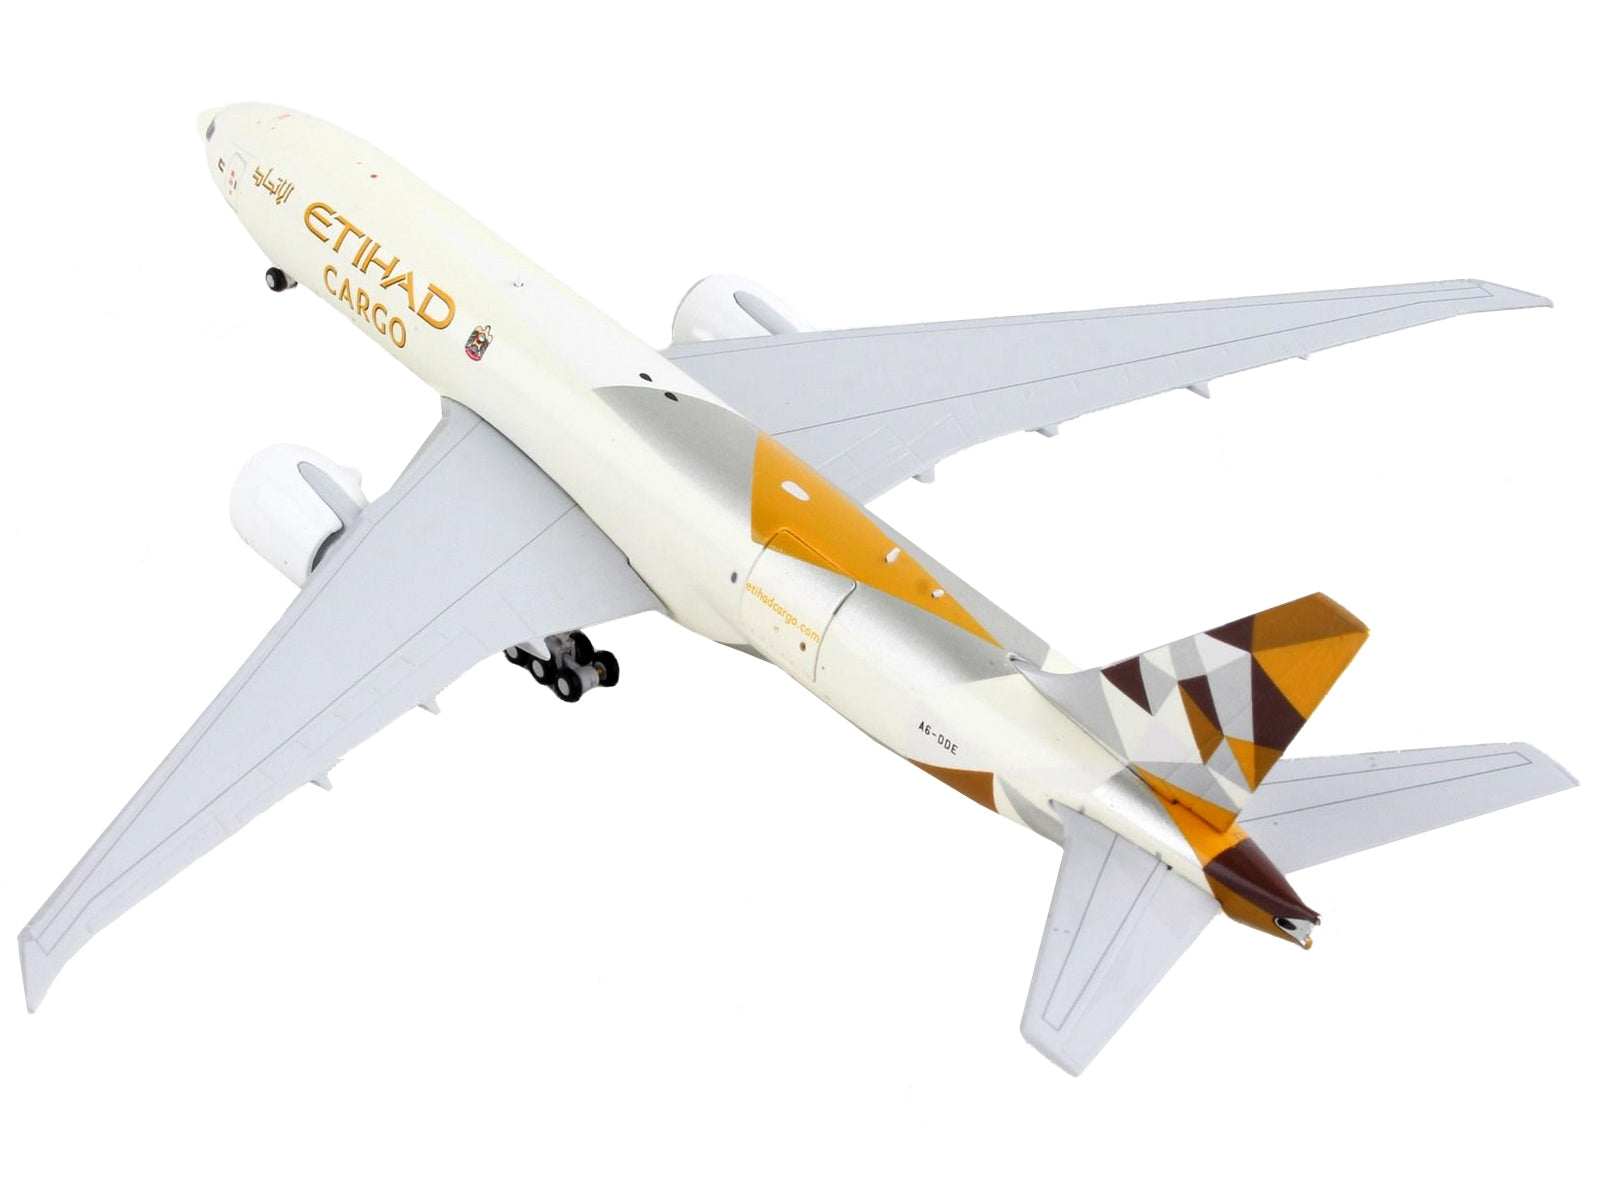 Boeing 777F Commercial Aircraft "Etihad Cargo" Beige with Graphics "Interactive Series" 1/400 Diecast Model Airplane by GeminiJets